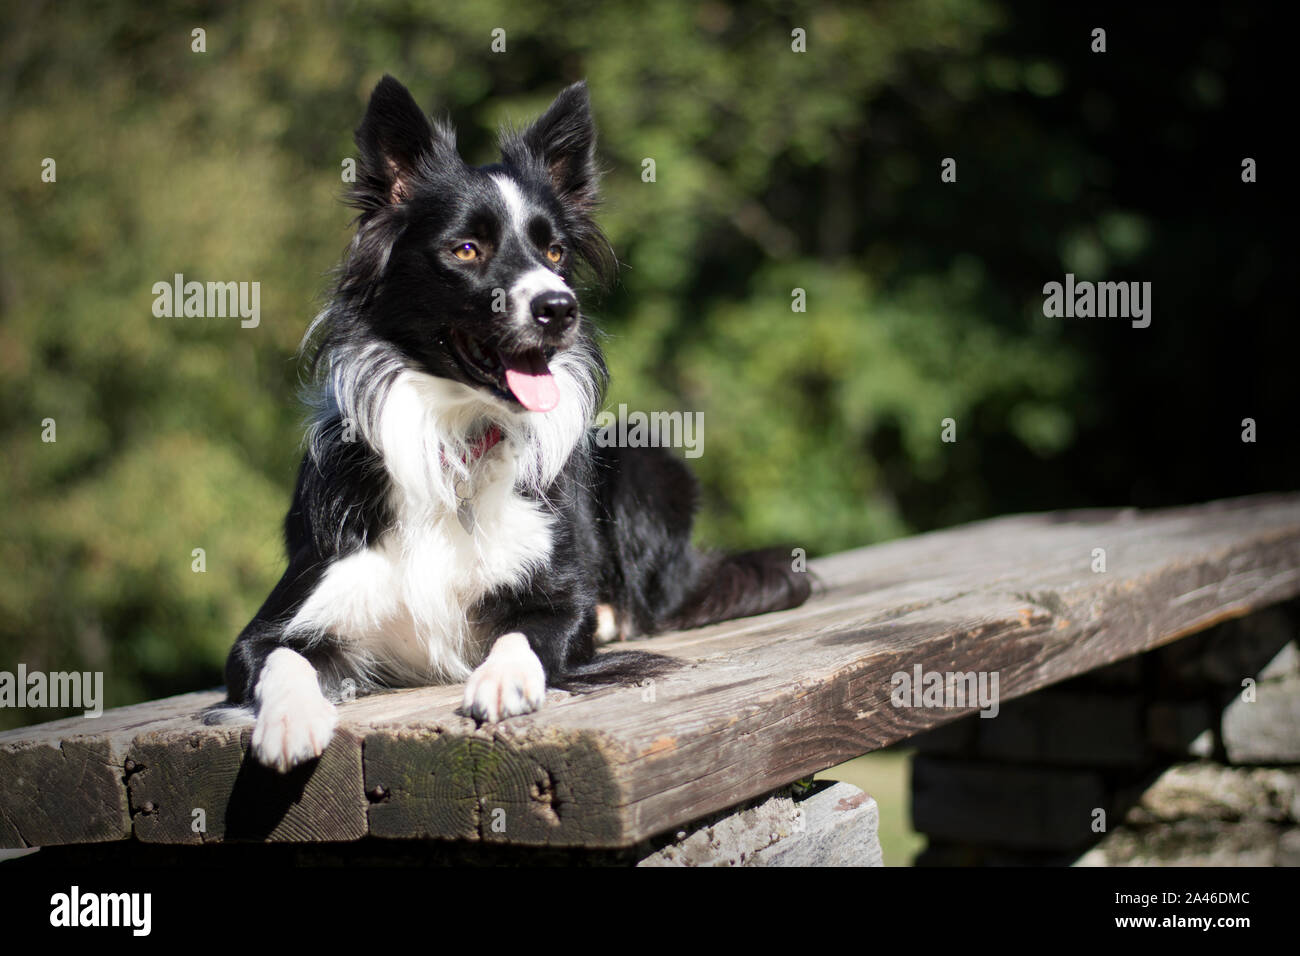 Funny border collie puppy lying on a wooden table in the woods Stock Photo